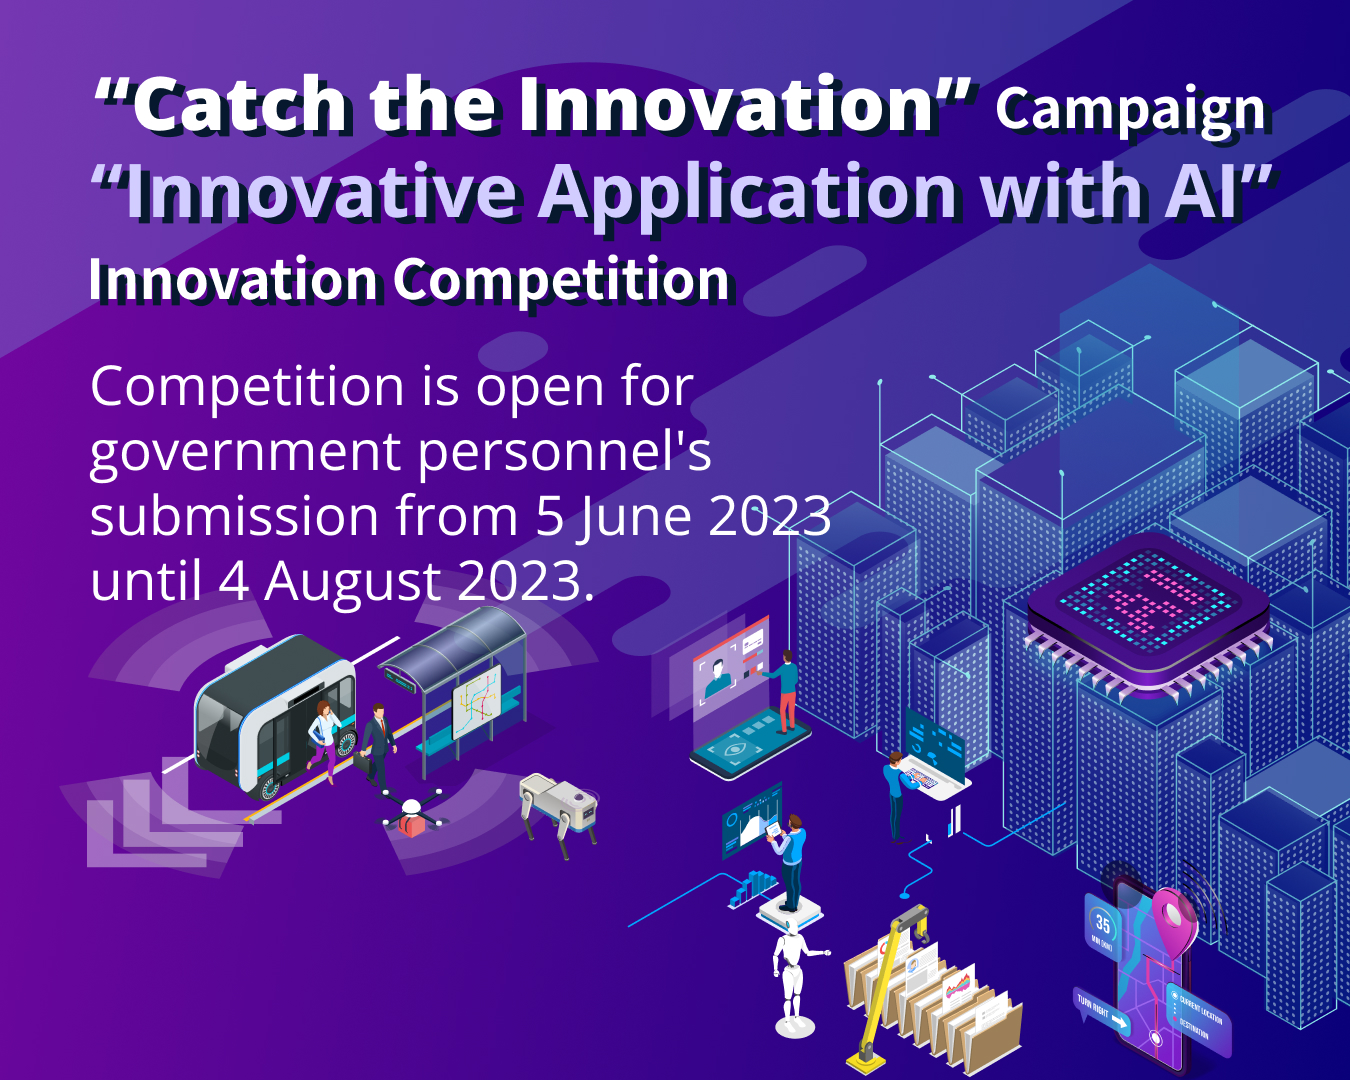 "Innovative Application with AI" Innovation Competition